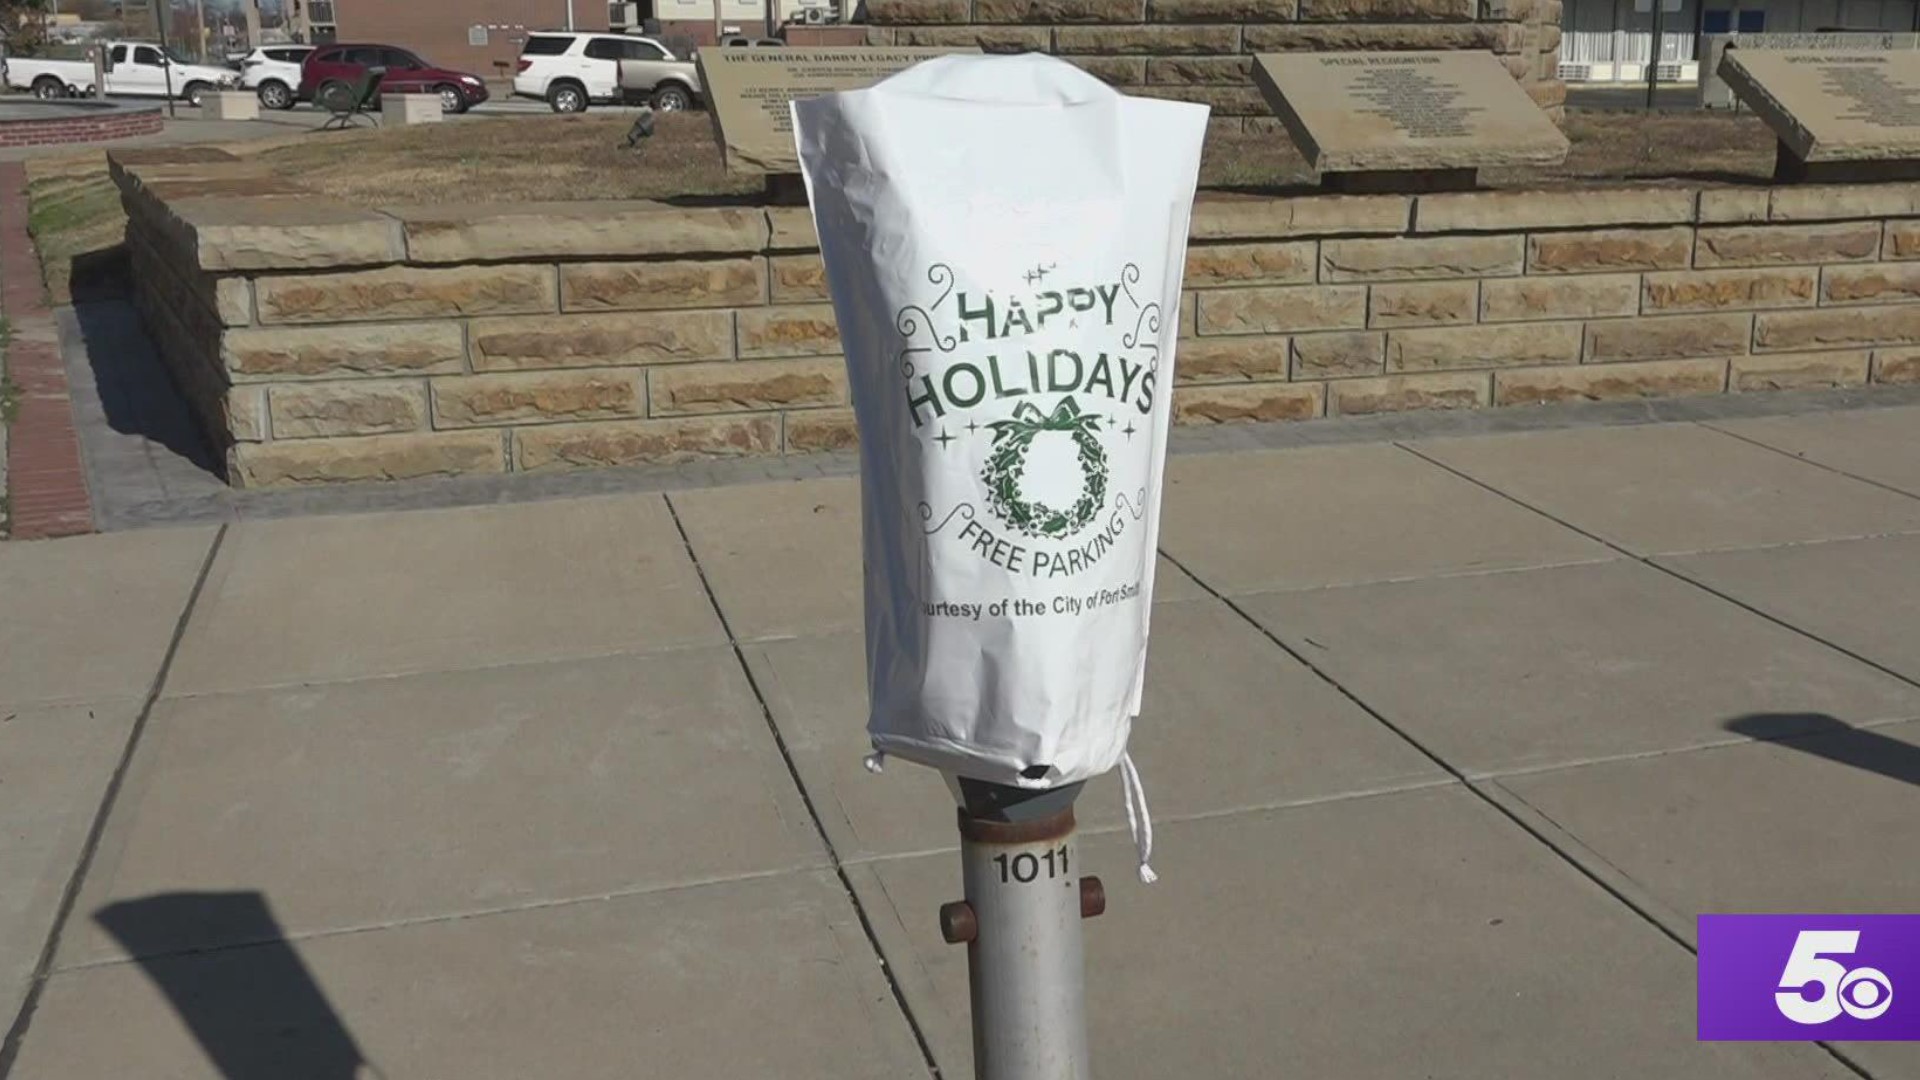 For several weeks, the parking meters will be covered downtown allowing free parking.